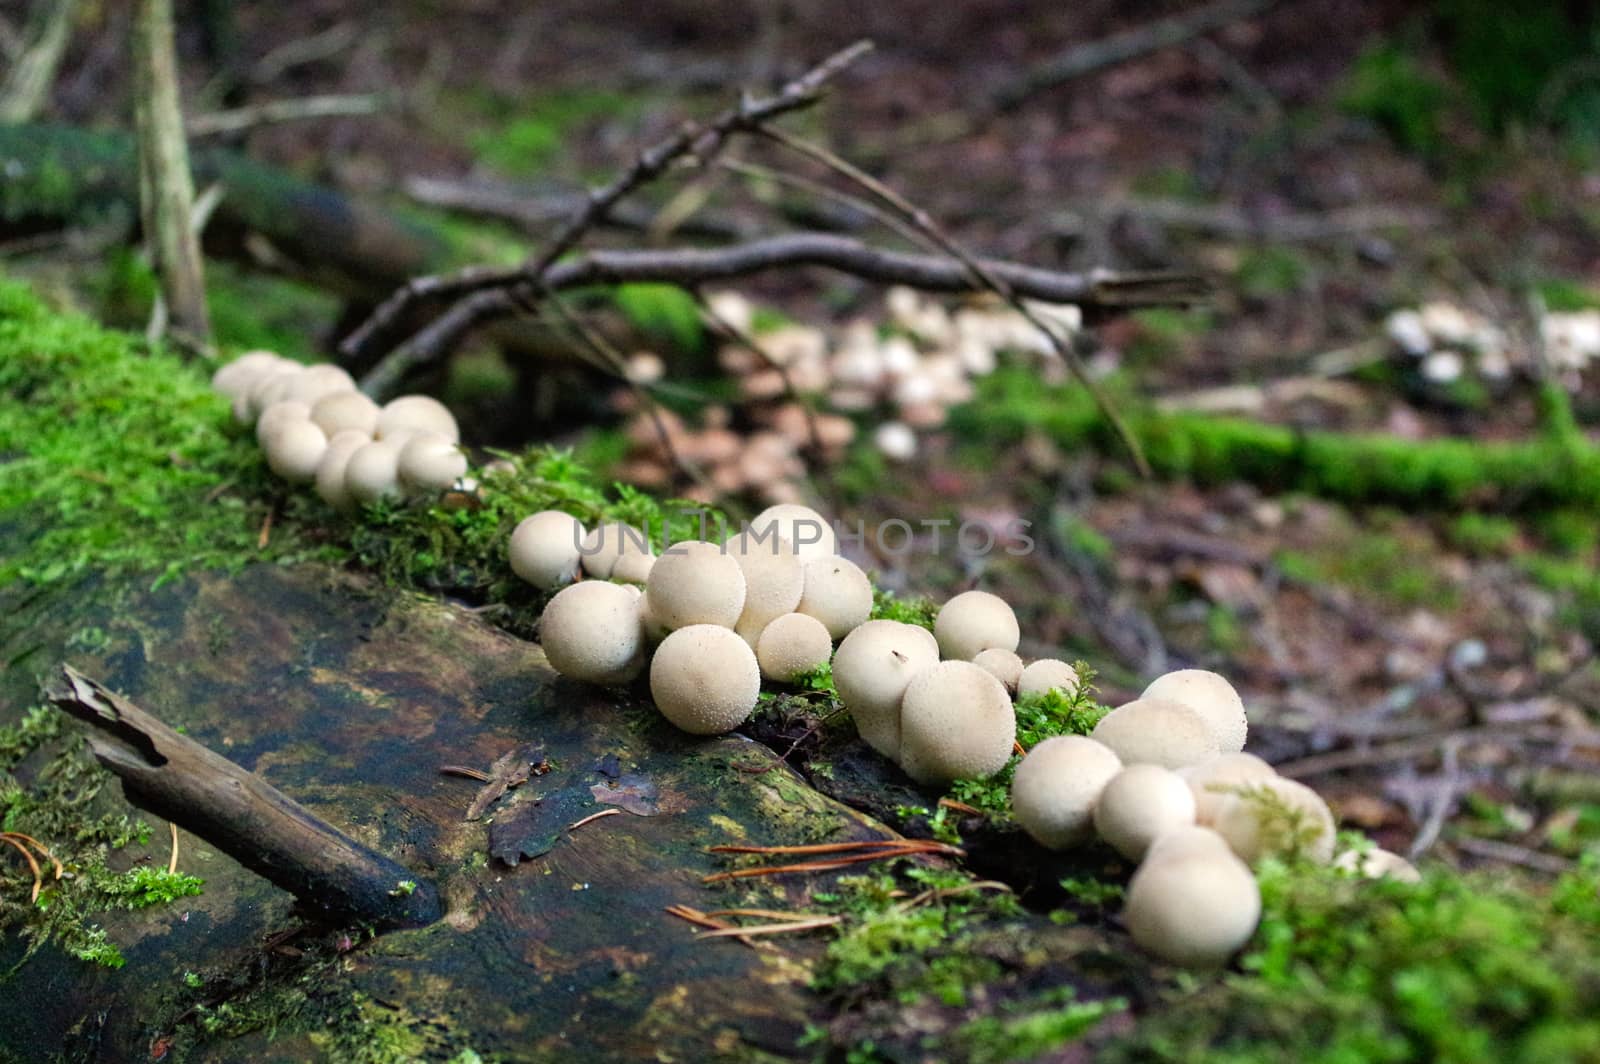 Lycoperdon marginatum mushroom growing in a forest ground. commonly known as the peeling puffball by evolutionnow